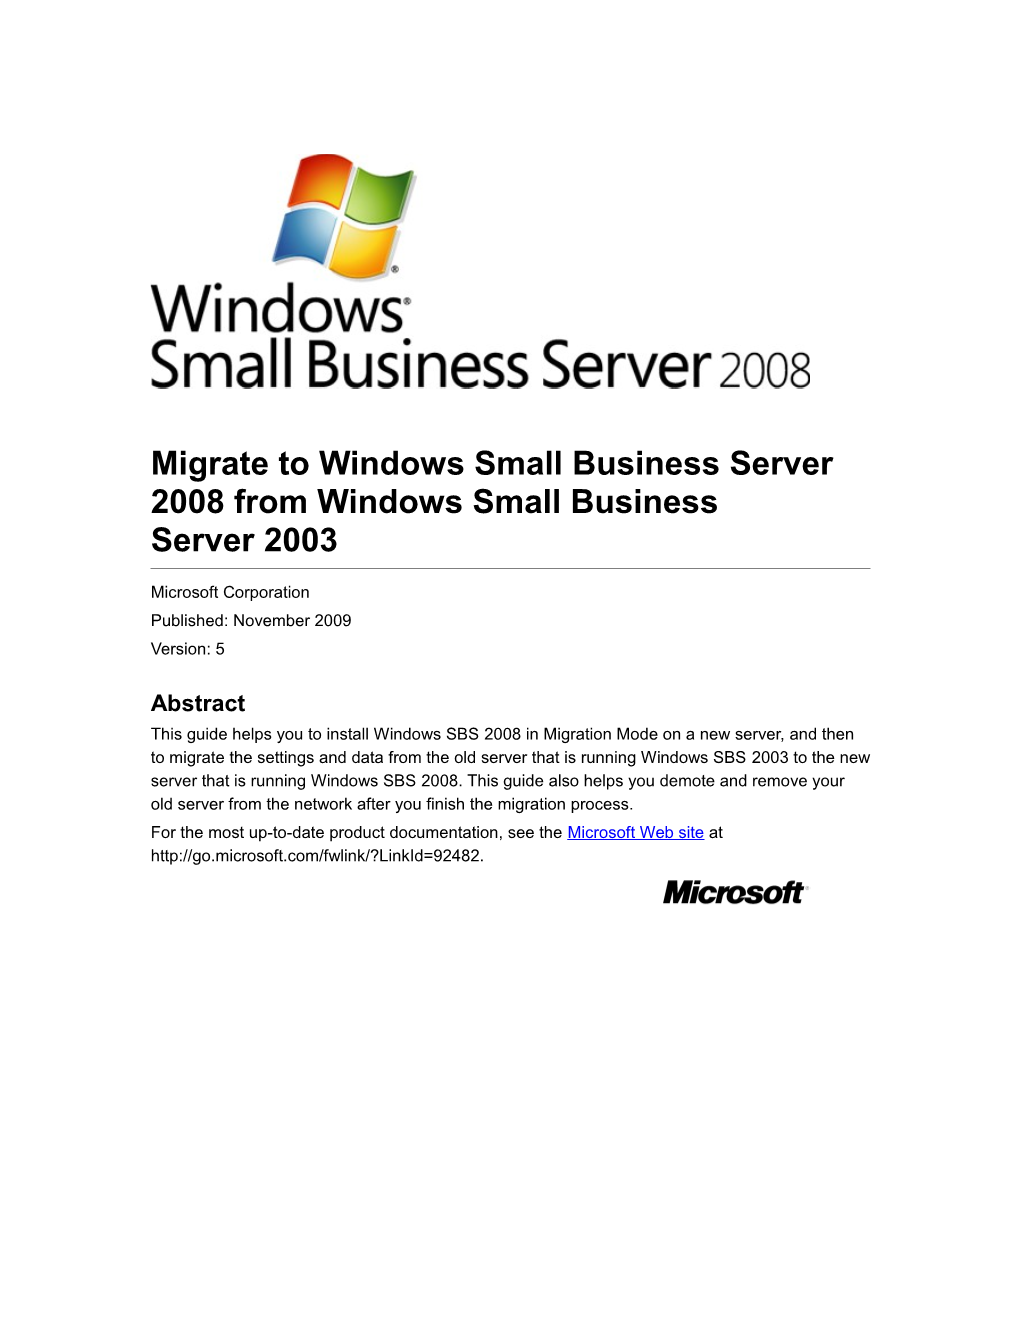 Migrate to Windows Small Business Server 2008 from Windows Small Business Server2003